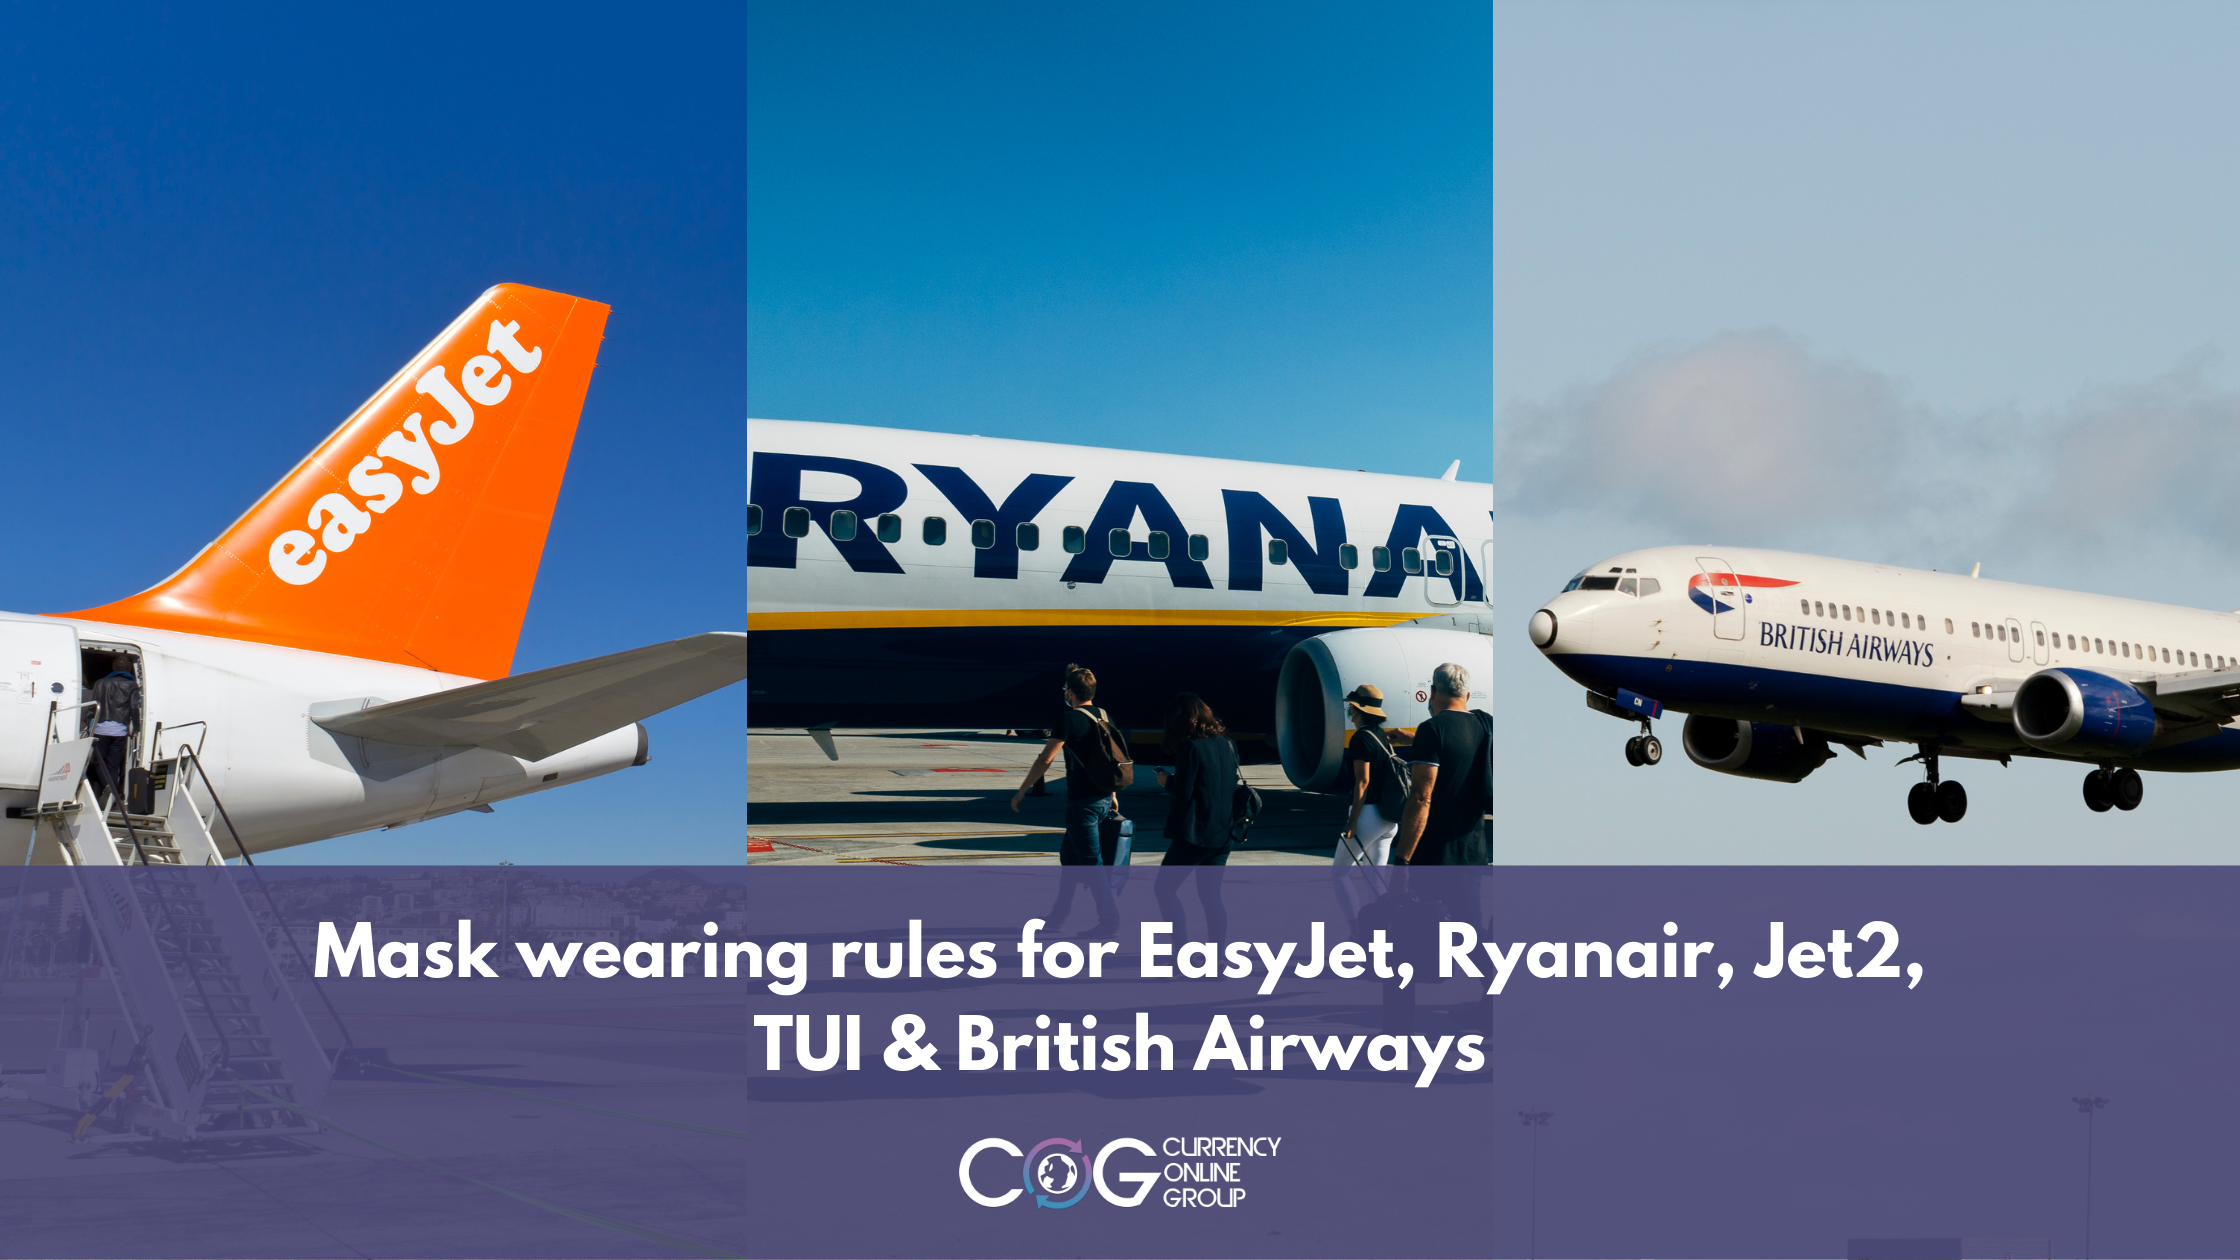 Mask wearing rules for Jet2, EasyJet, Ryanair, British Airways and TUI